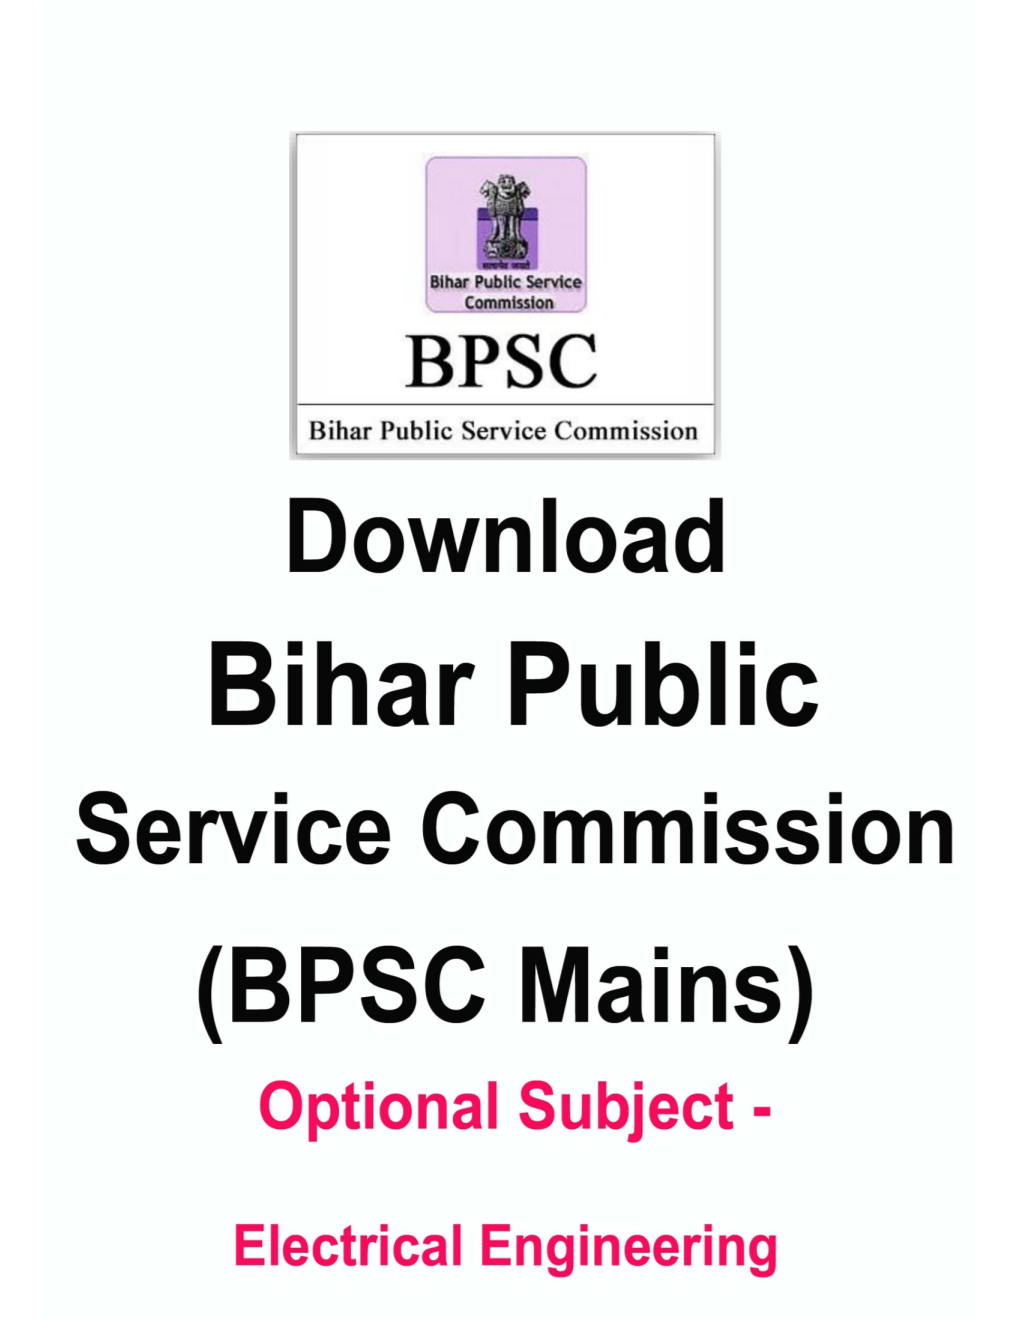 Download-BPSC-Mains-Exam-Syllabus-Optional-Subjects-Electrical-Engineering.Pdf